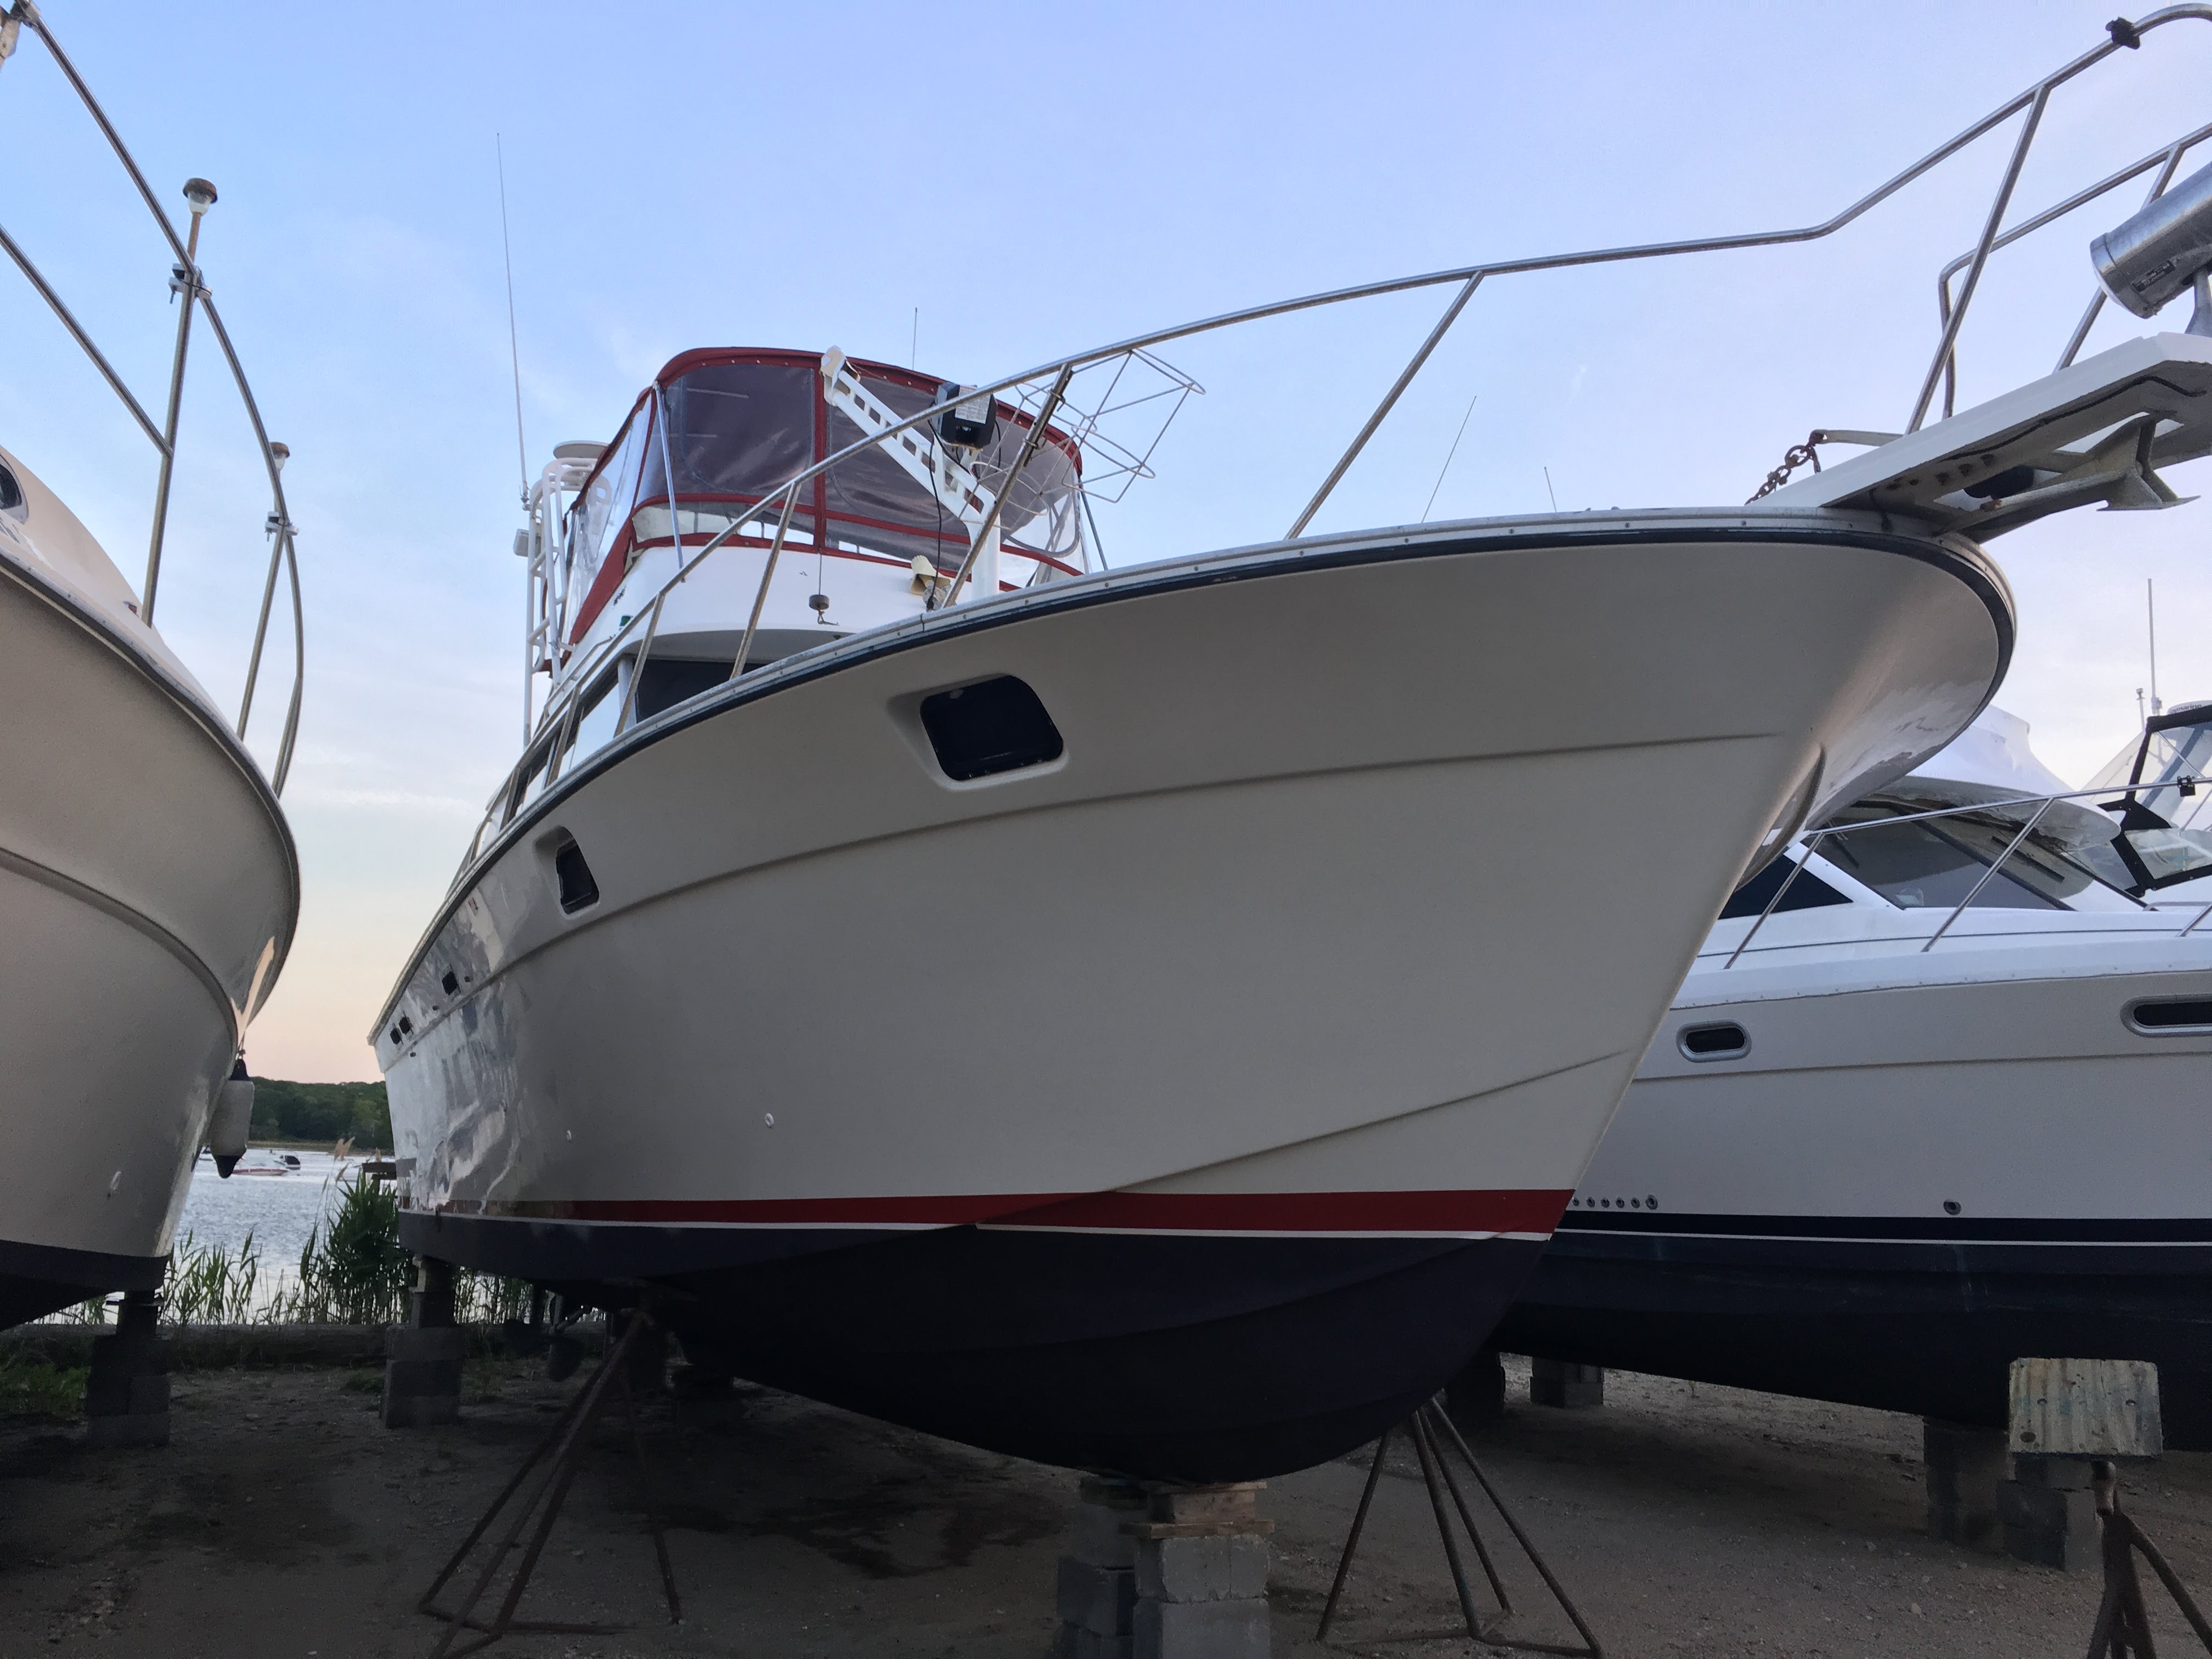 1989 37 foot Silverton Convertible  Power boat for sale in Mount Sinai, NY - image 8 